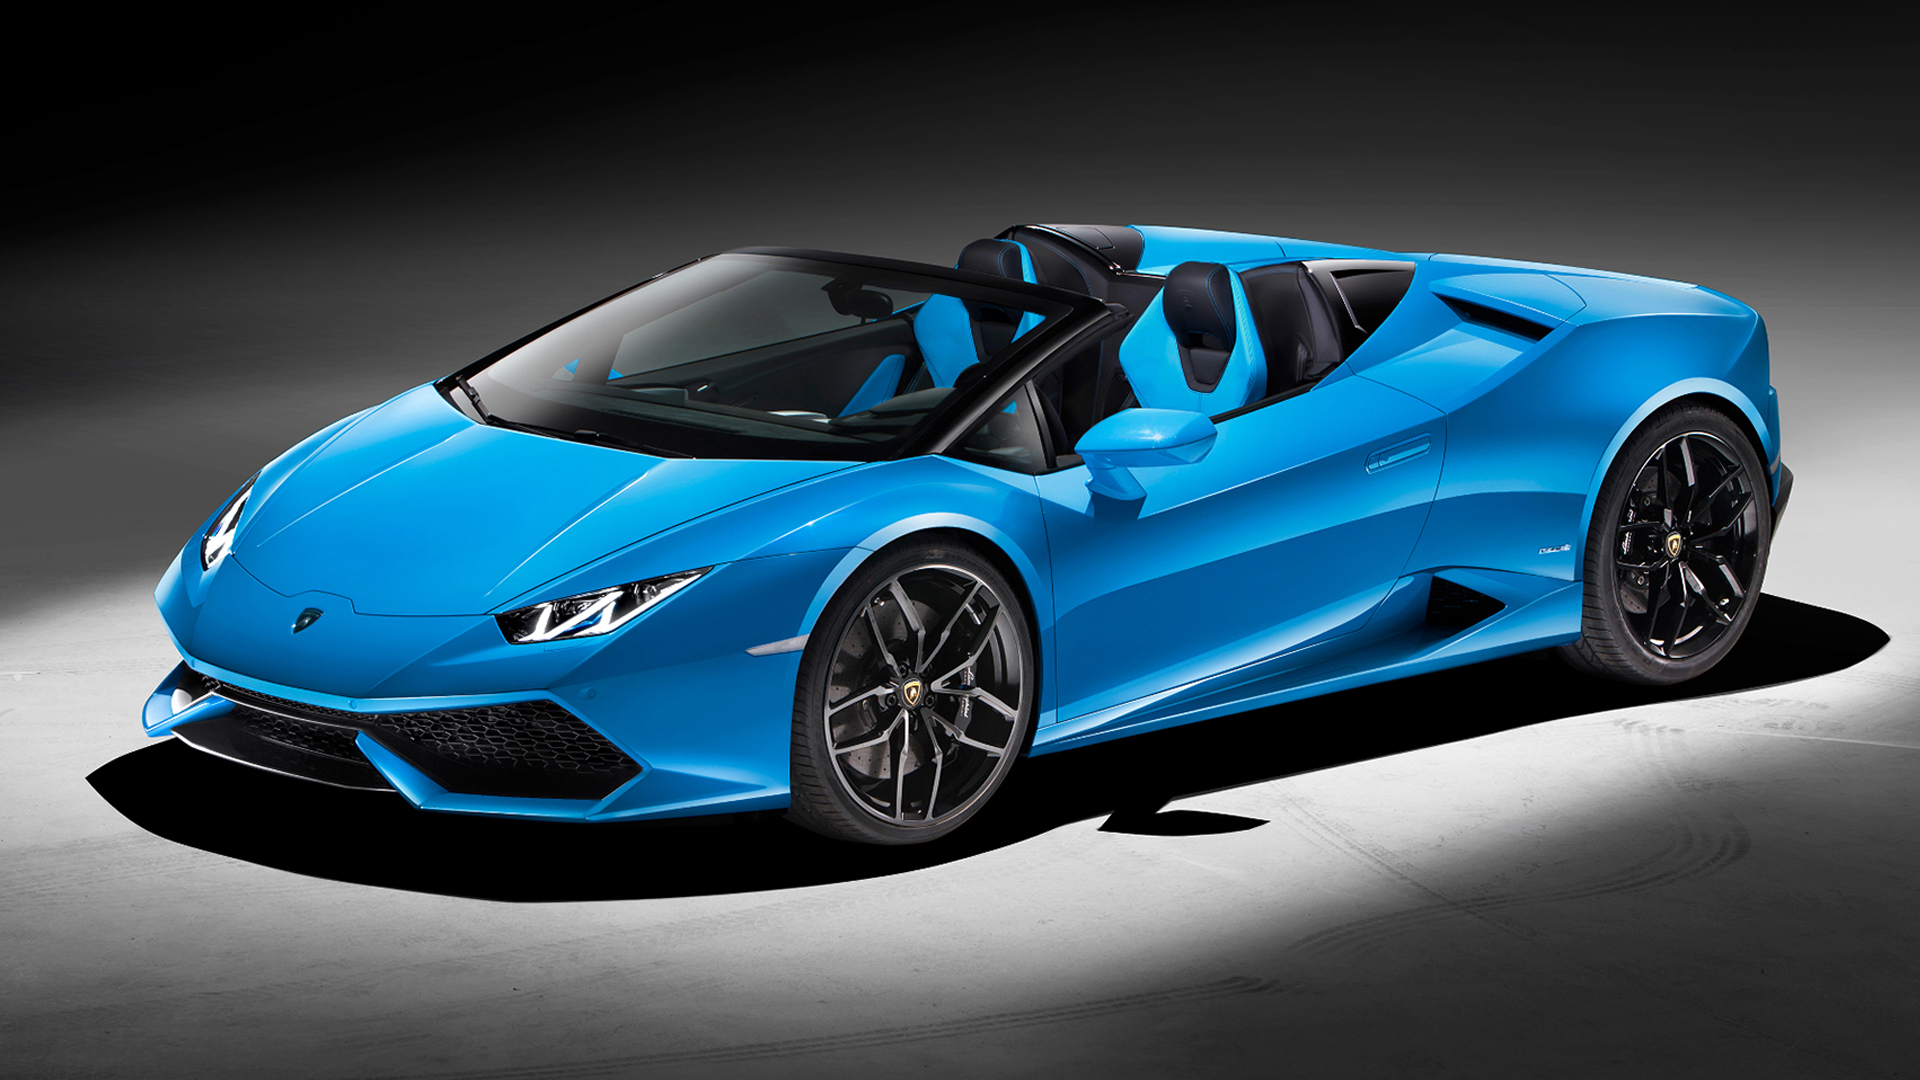 Lamborghini Huracan 2022 Tecnica - Price in India, Mileage, Reviews,  Colours, Specification, Images - Overdrive